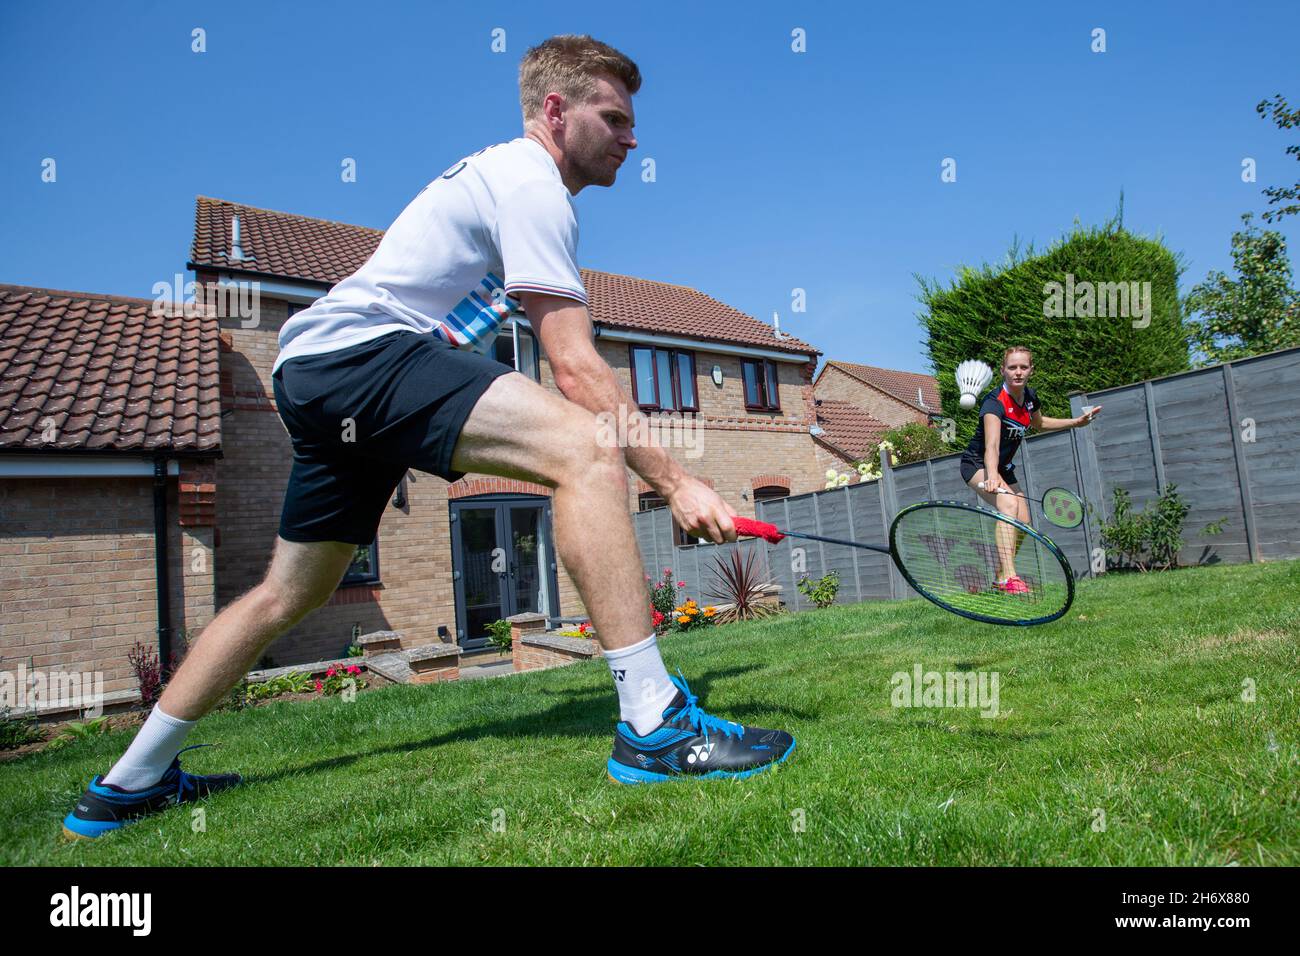 11/06/20 - Badminton England mixed doubles players Marcus Ellis and Lauren Smith playing badminton at home following Covid-19 lockdown. Stock Photo